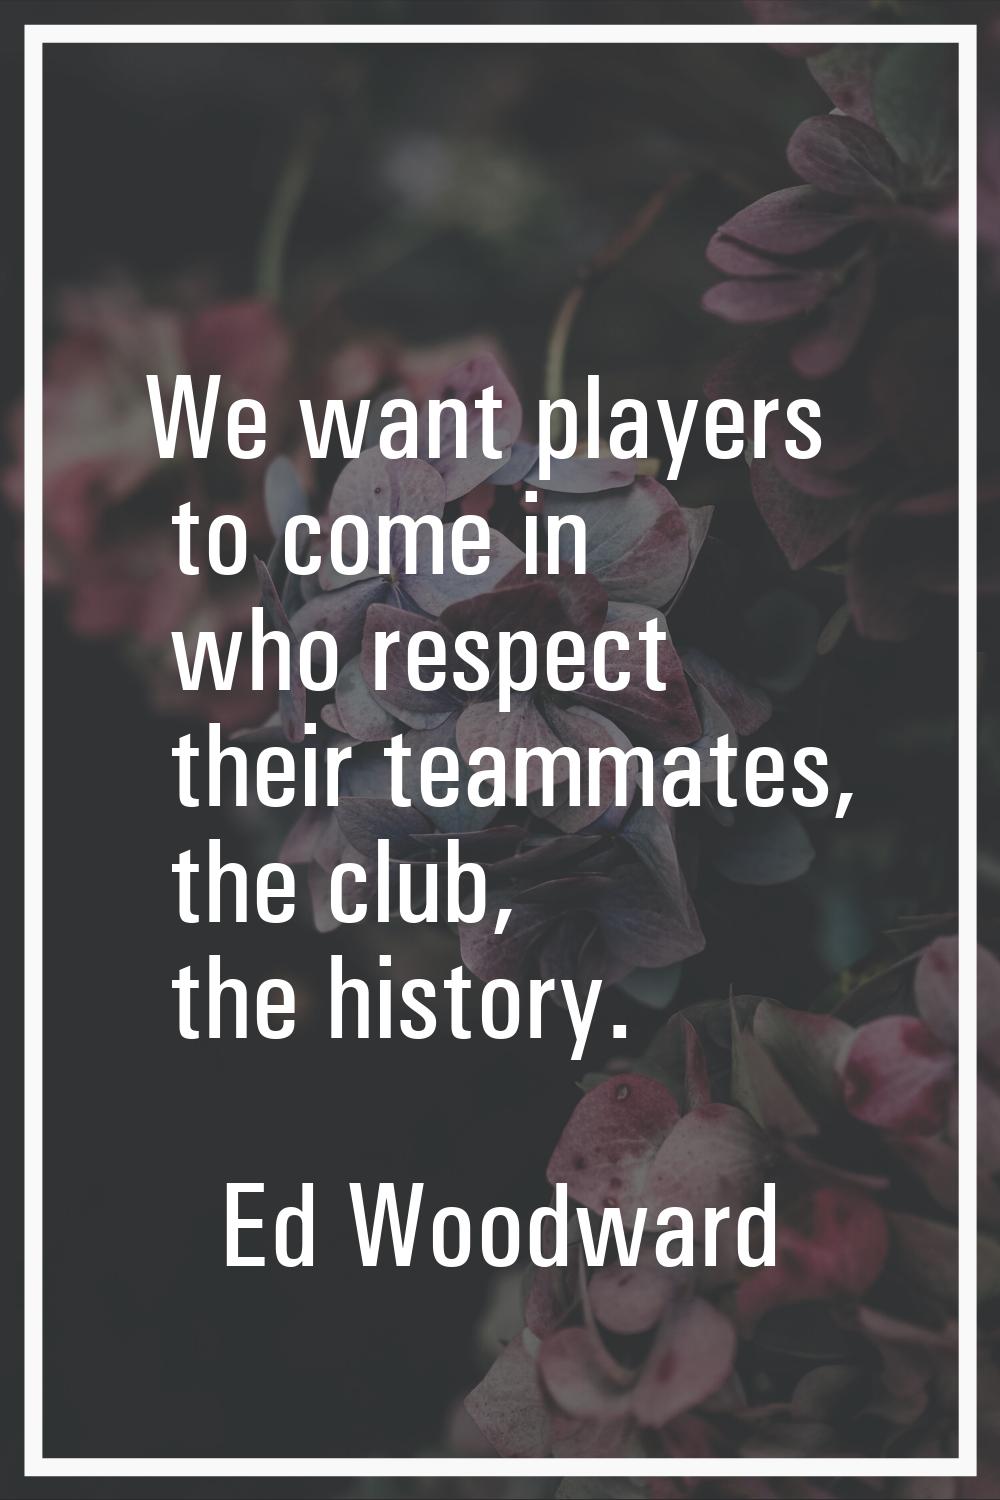 We want players to come in who respect their teammates, the club, the history.